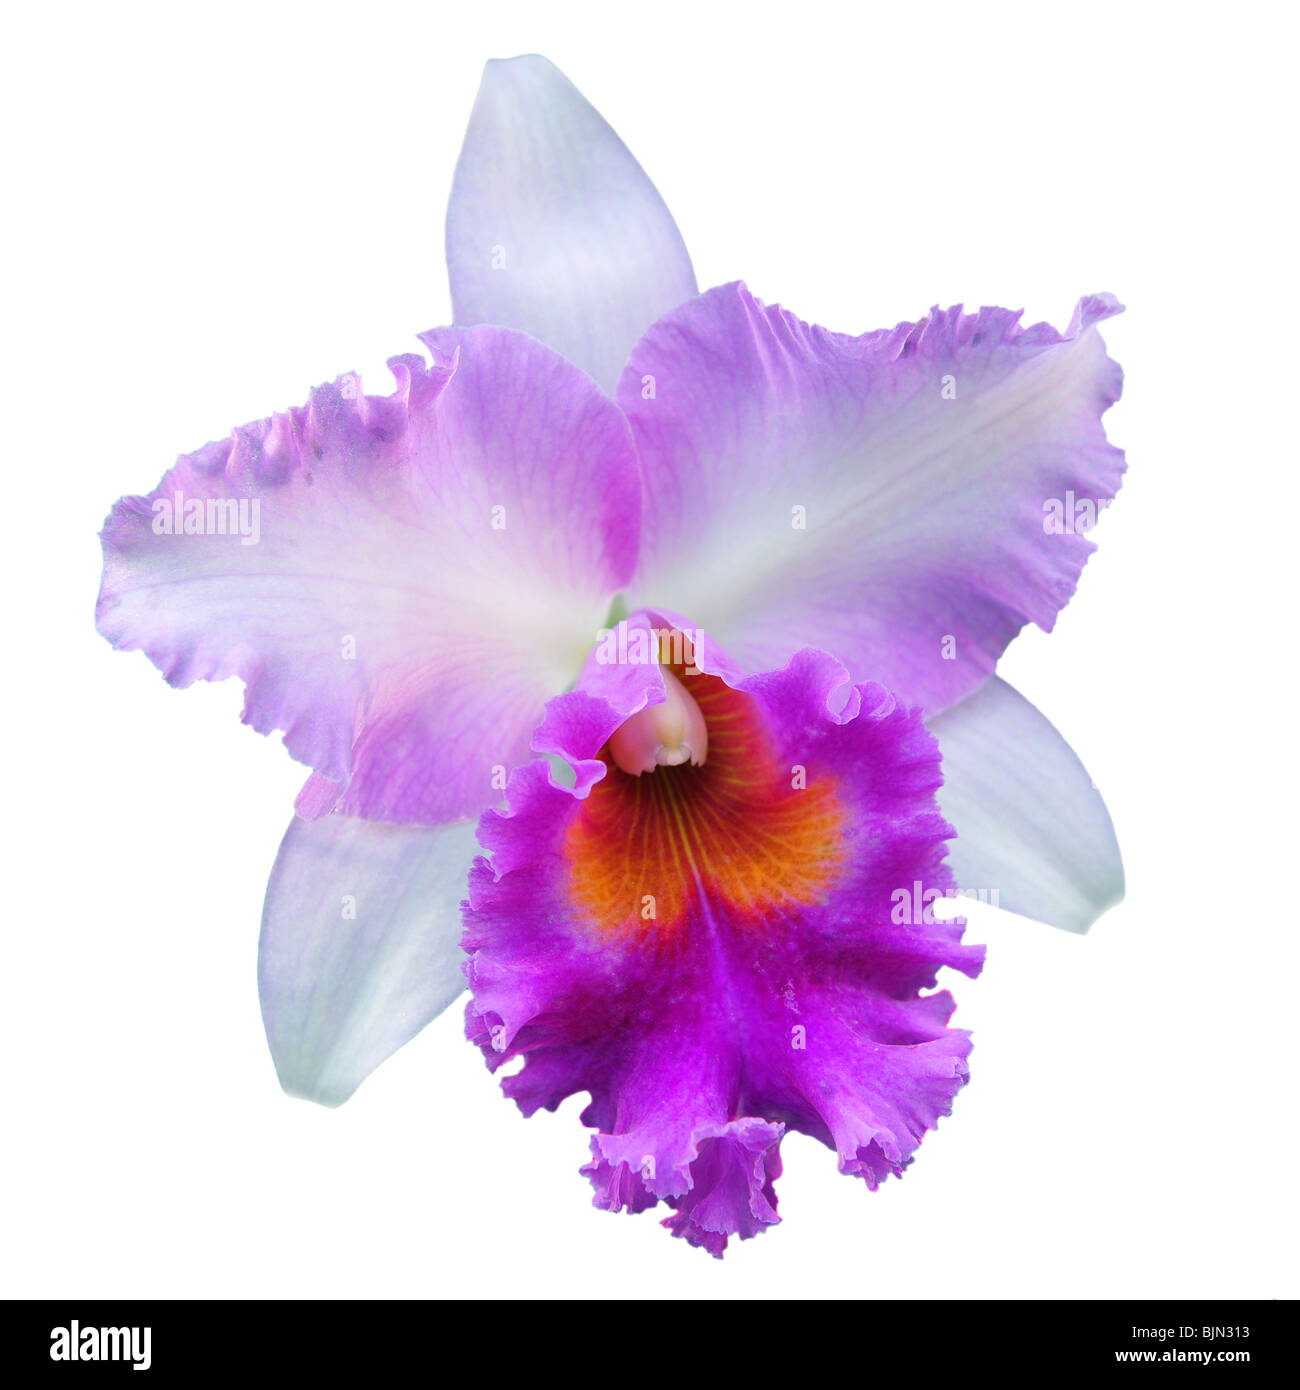 Seul orchid flower isolated on white Banque D'Images